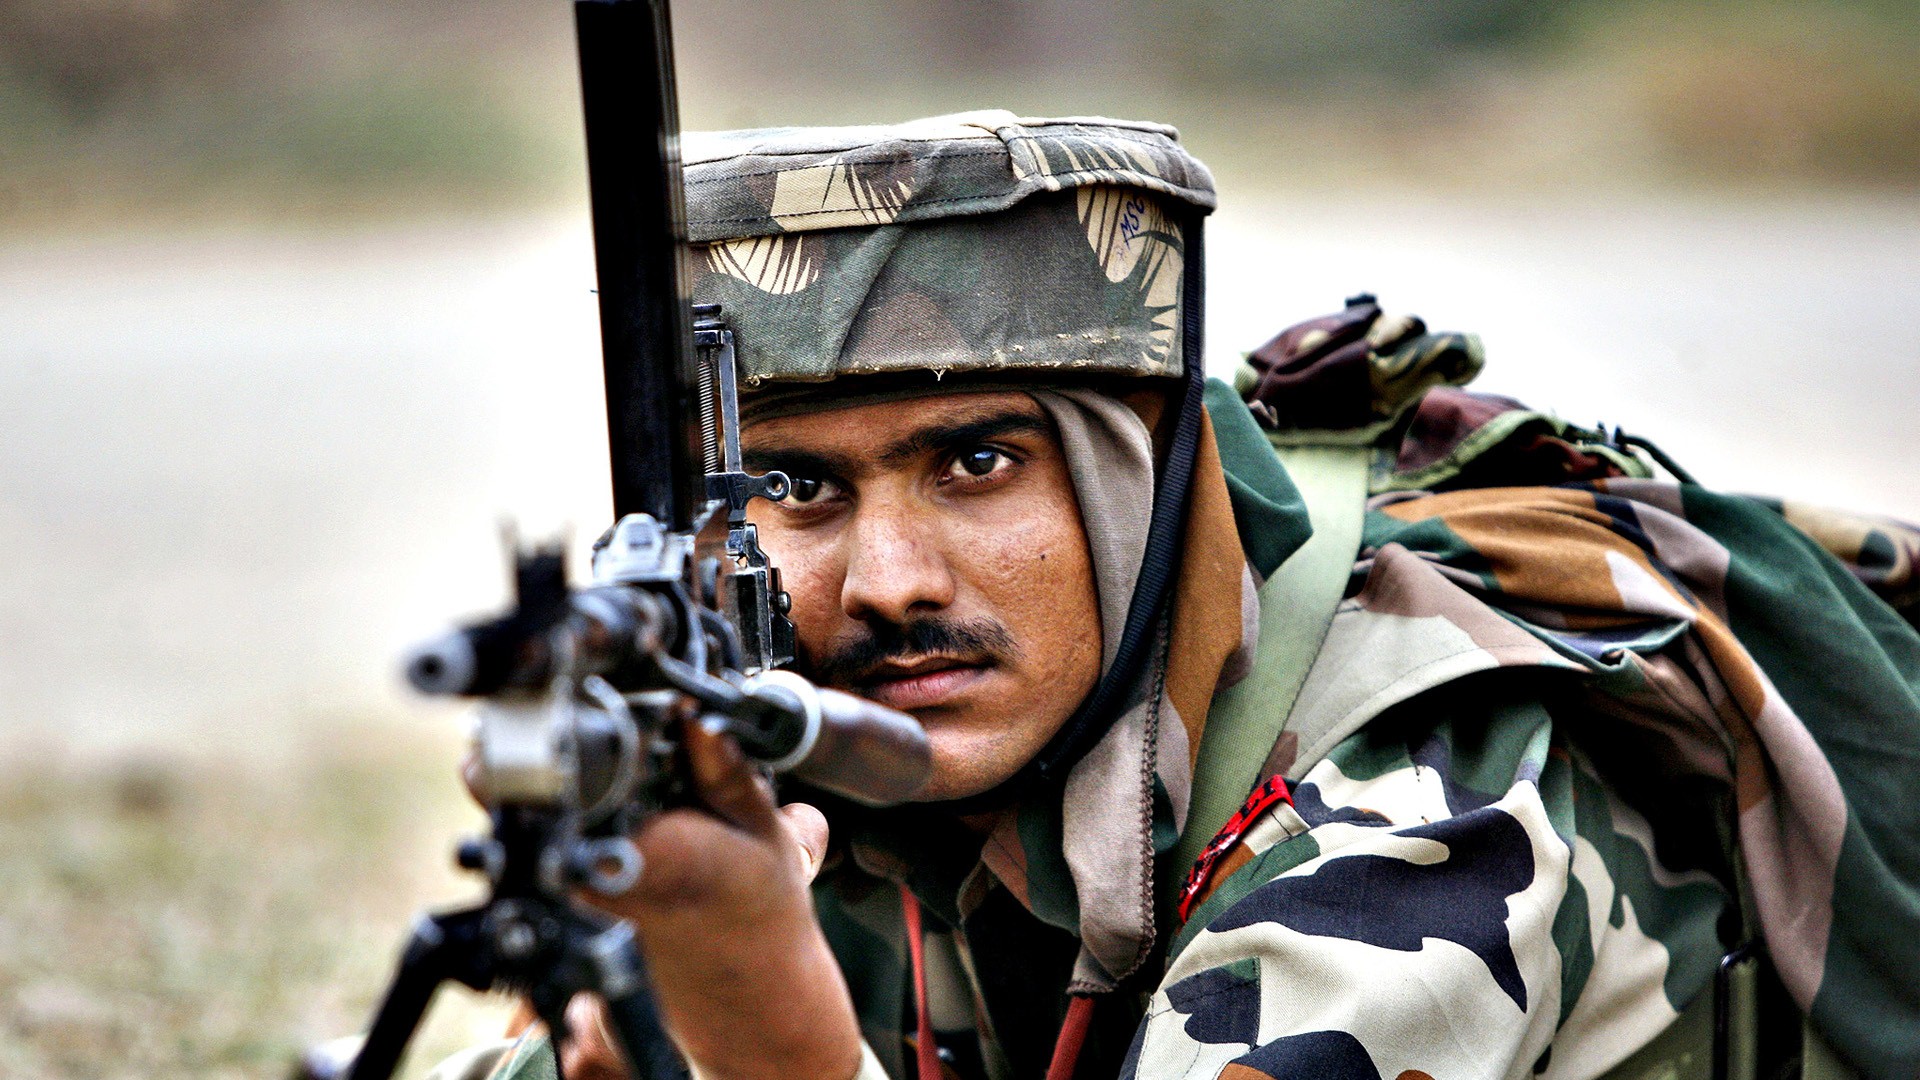 Indian Soldier Shooting With Gun - Indian Army Man With Gun - HD Wallpaper 